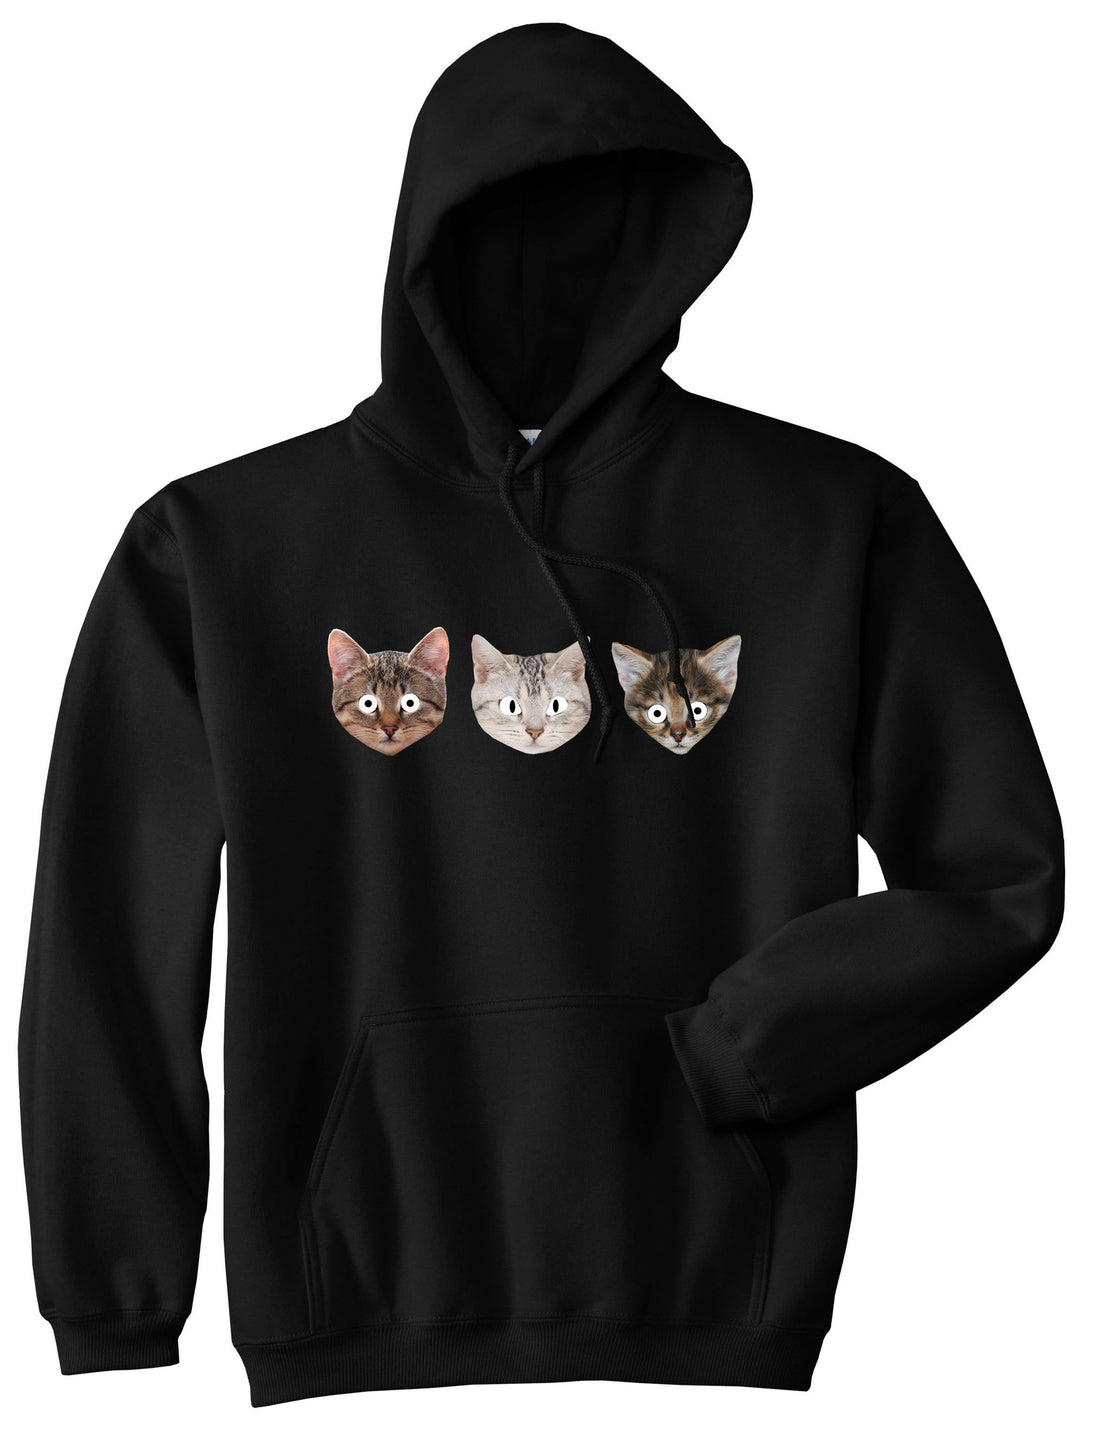 Cats Crazy Kittens Boys Kids Pullover Hoodie Hoody in Black By Kings Of NY